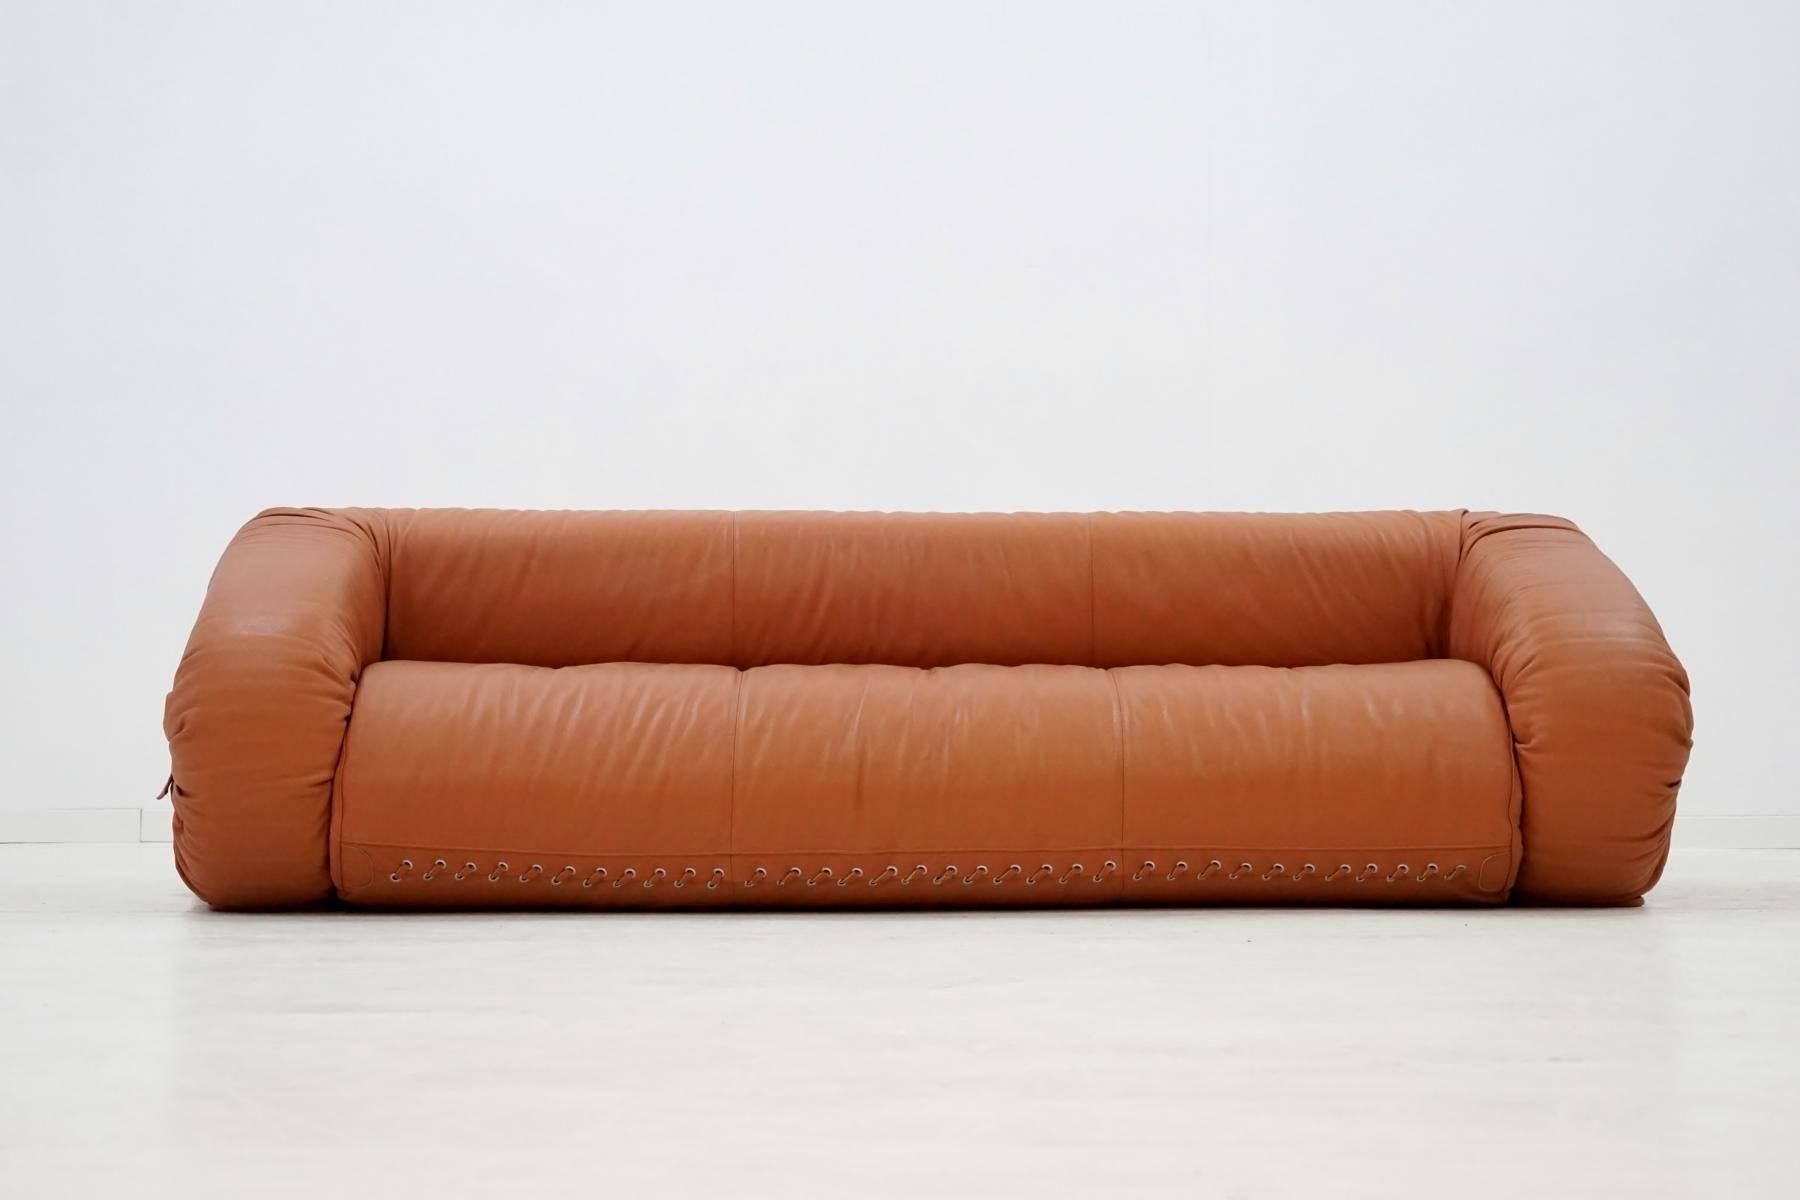 Mid-Century Modern Anfibio by Alessandro Becchi, Giovannetti Italy Sofa Daybed Canapé Couch Leather